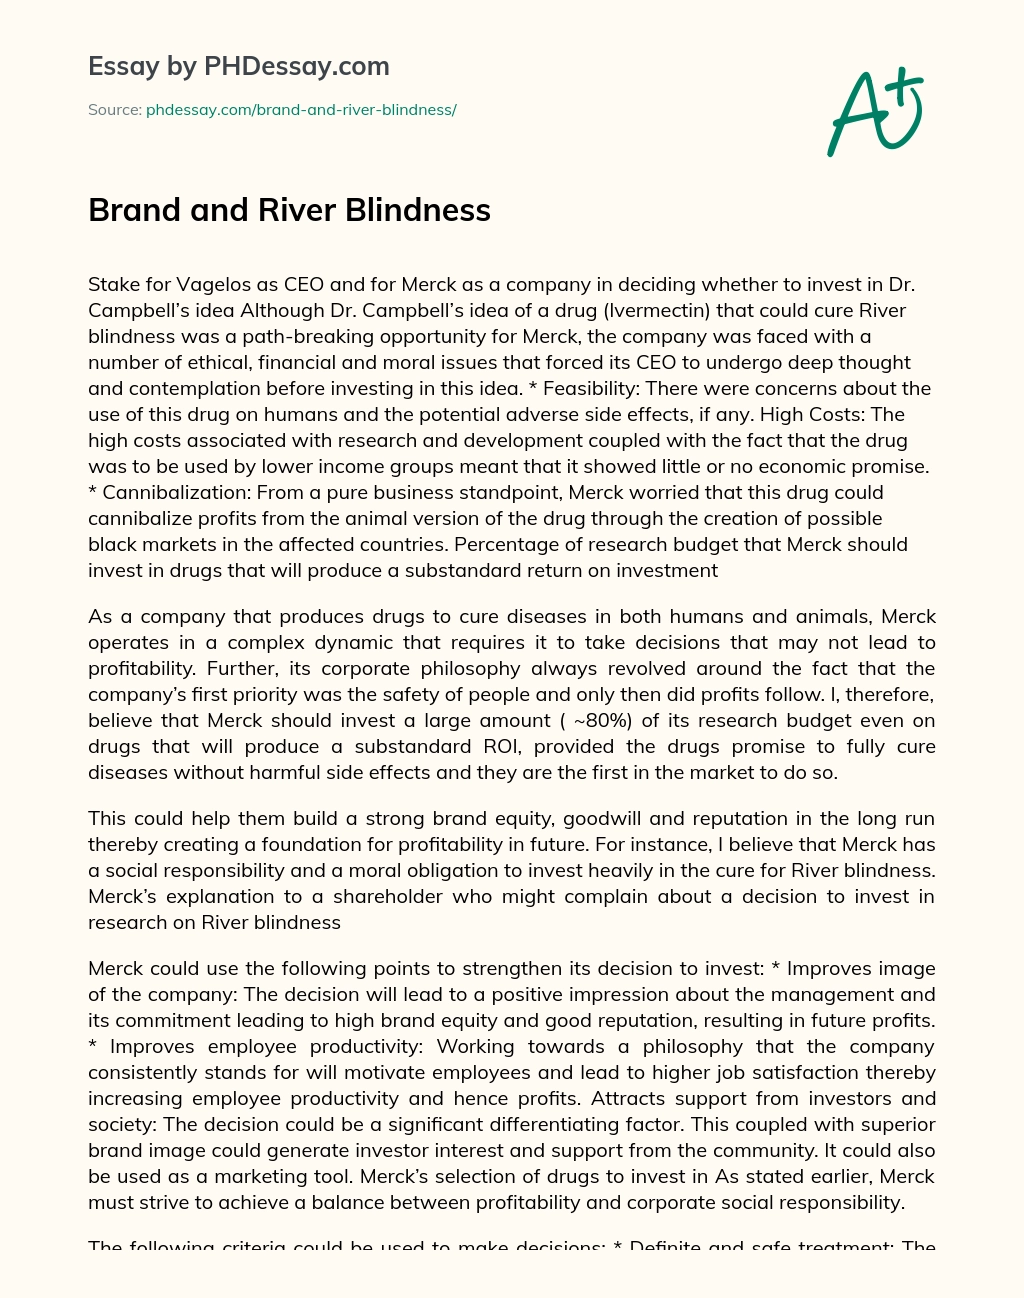 Brand and River Blindness essay